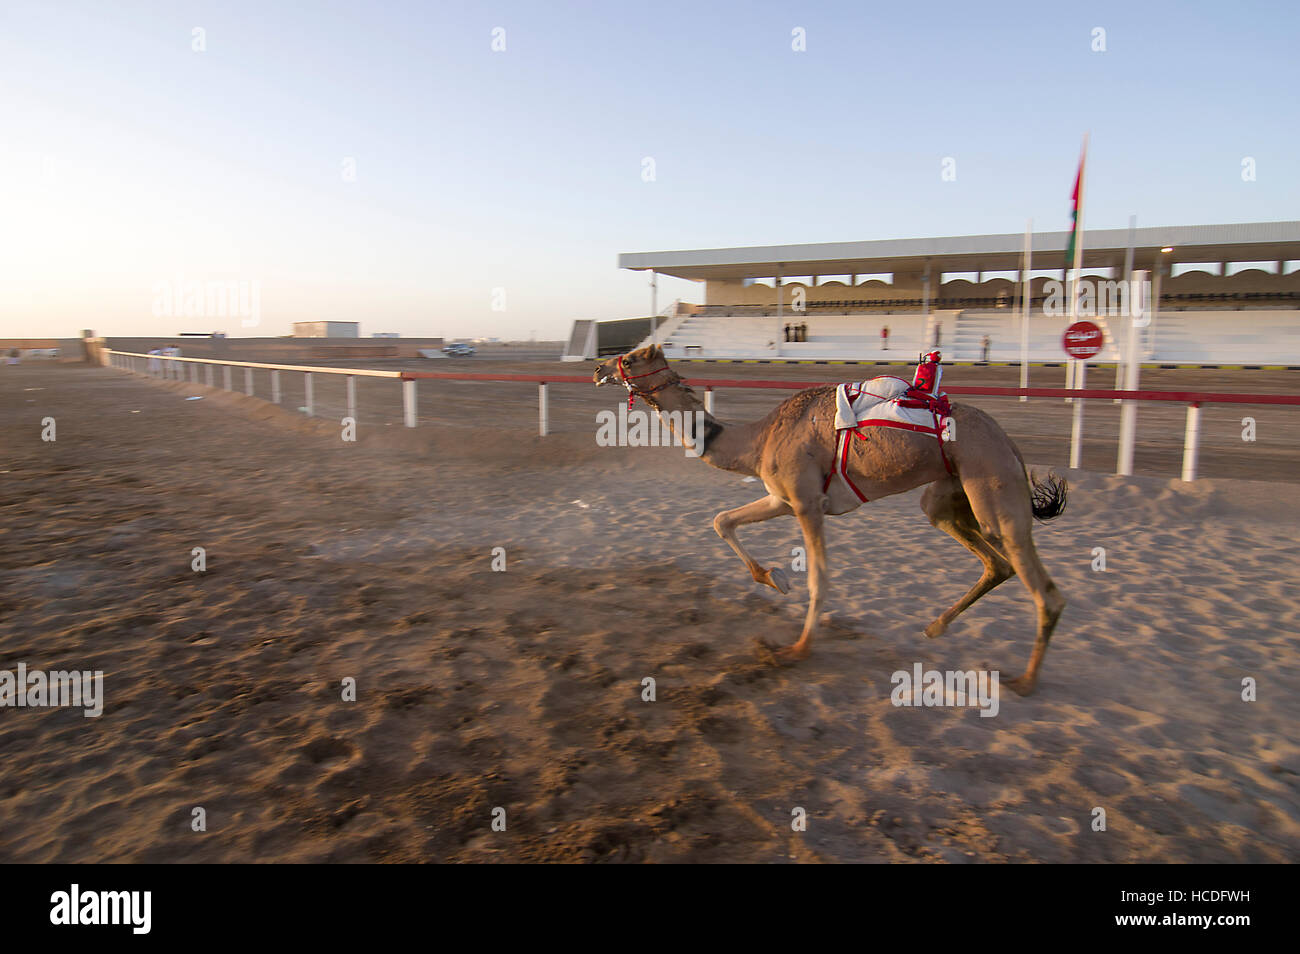 Camel with a robot jockey in the saddle approaching the finish line in a camel race on a racetrack in Oman. Stock Photo